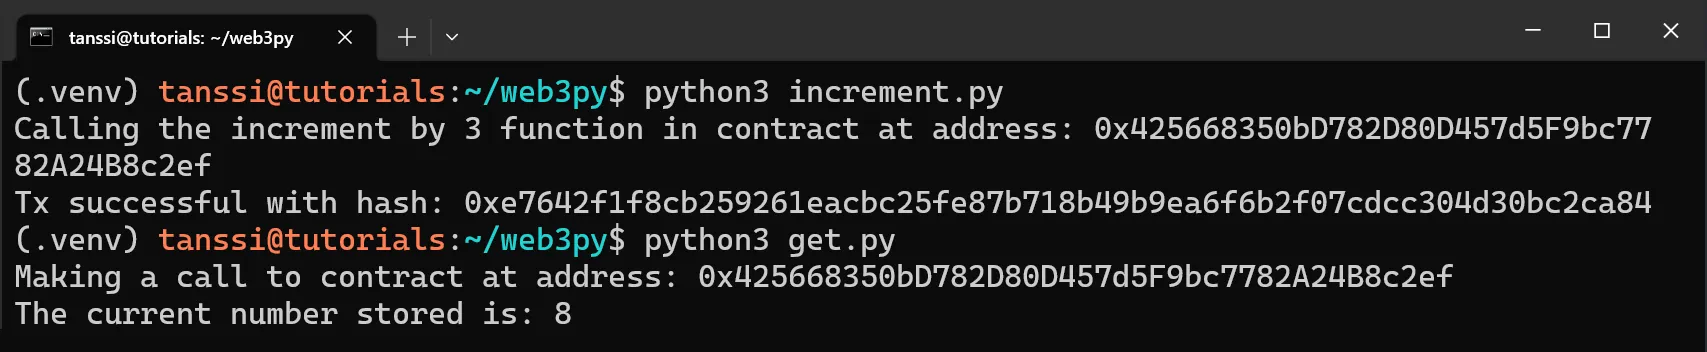 Increment Contract Web3py